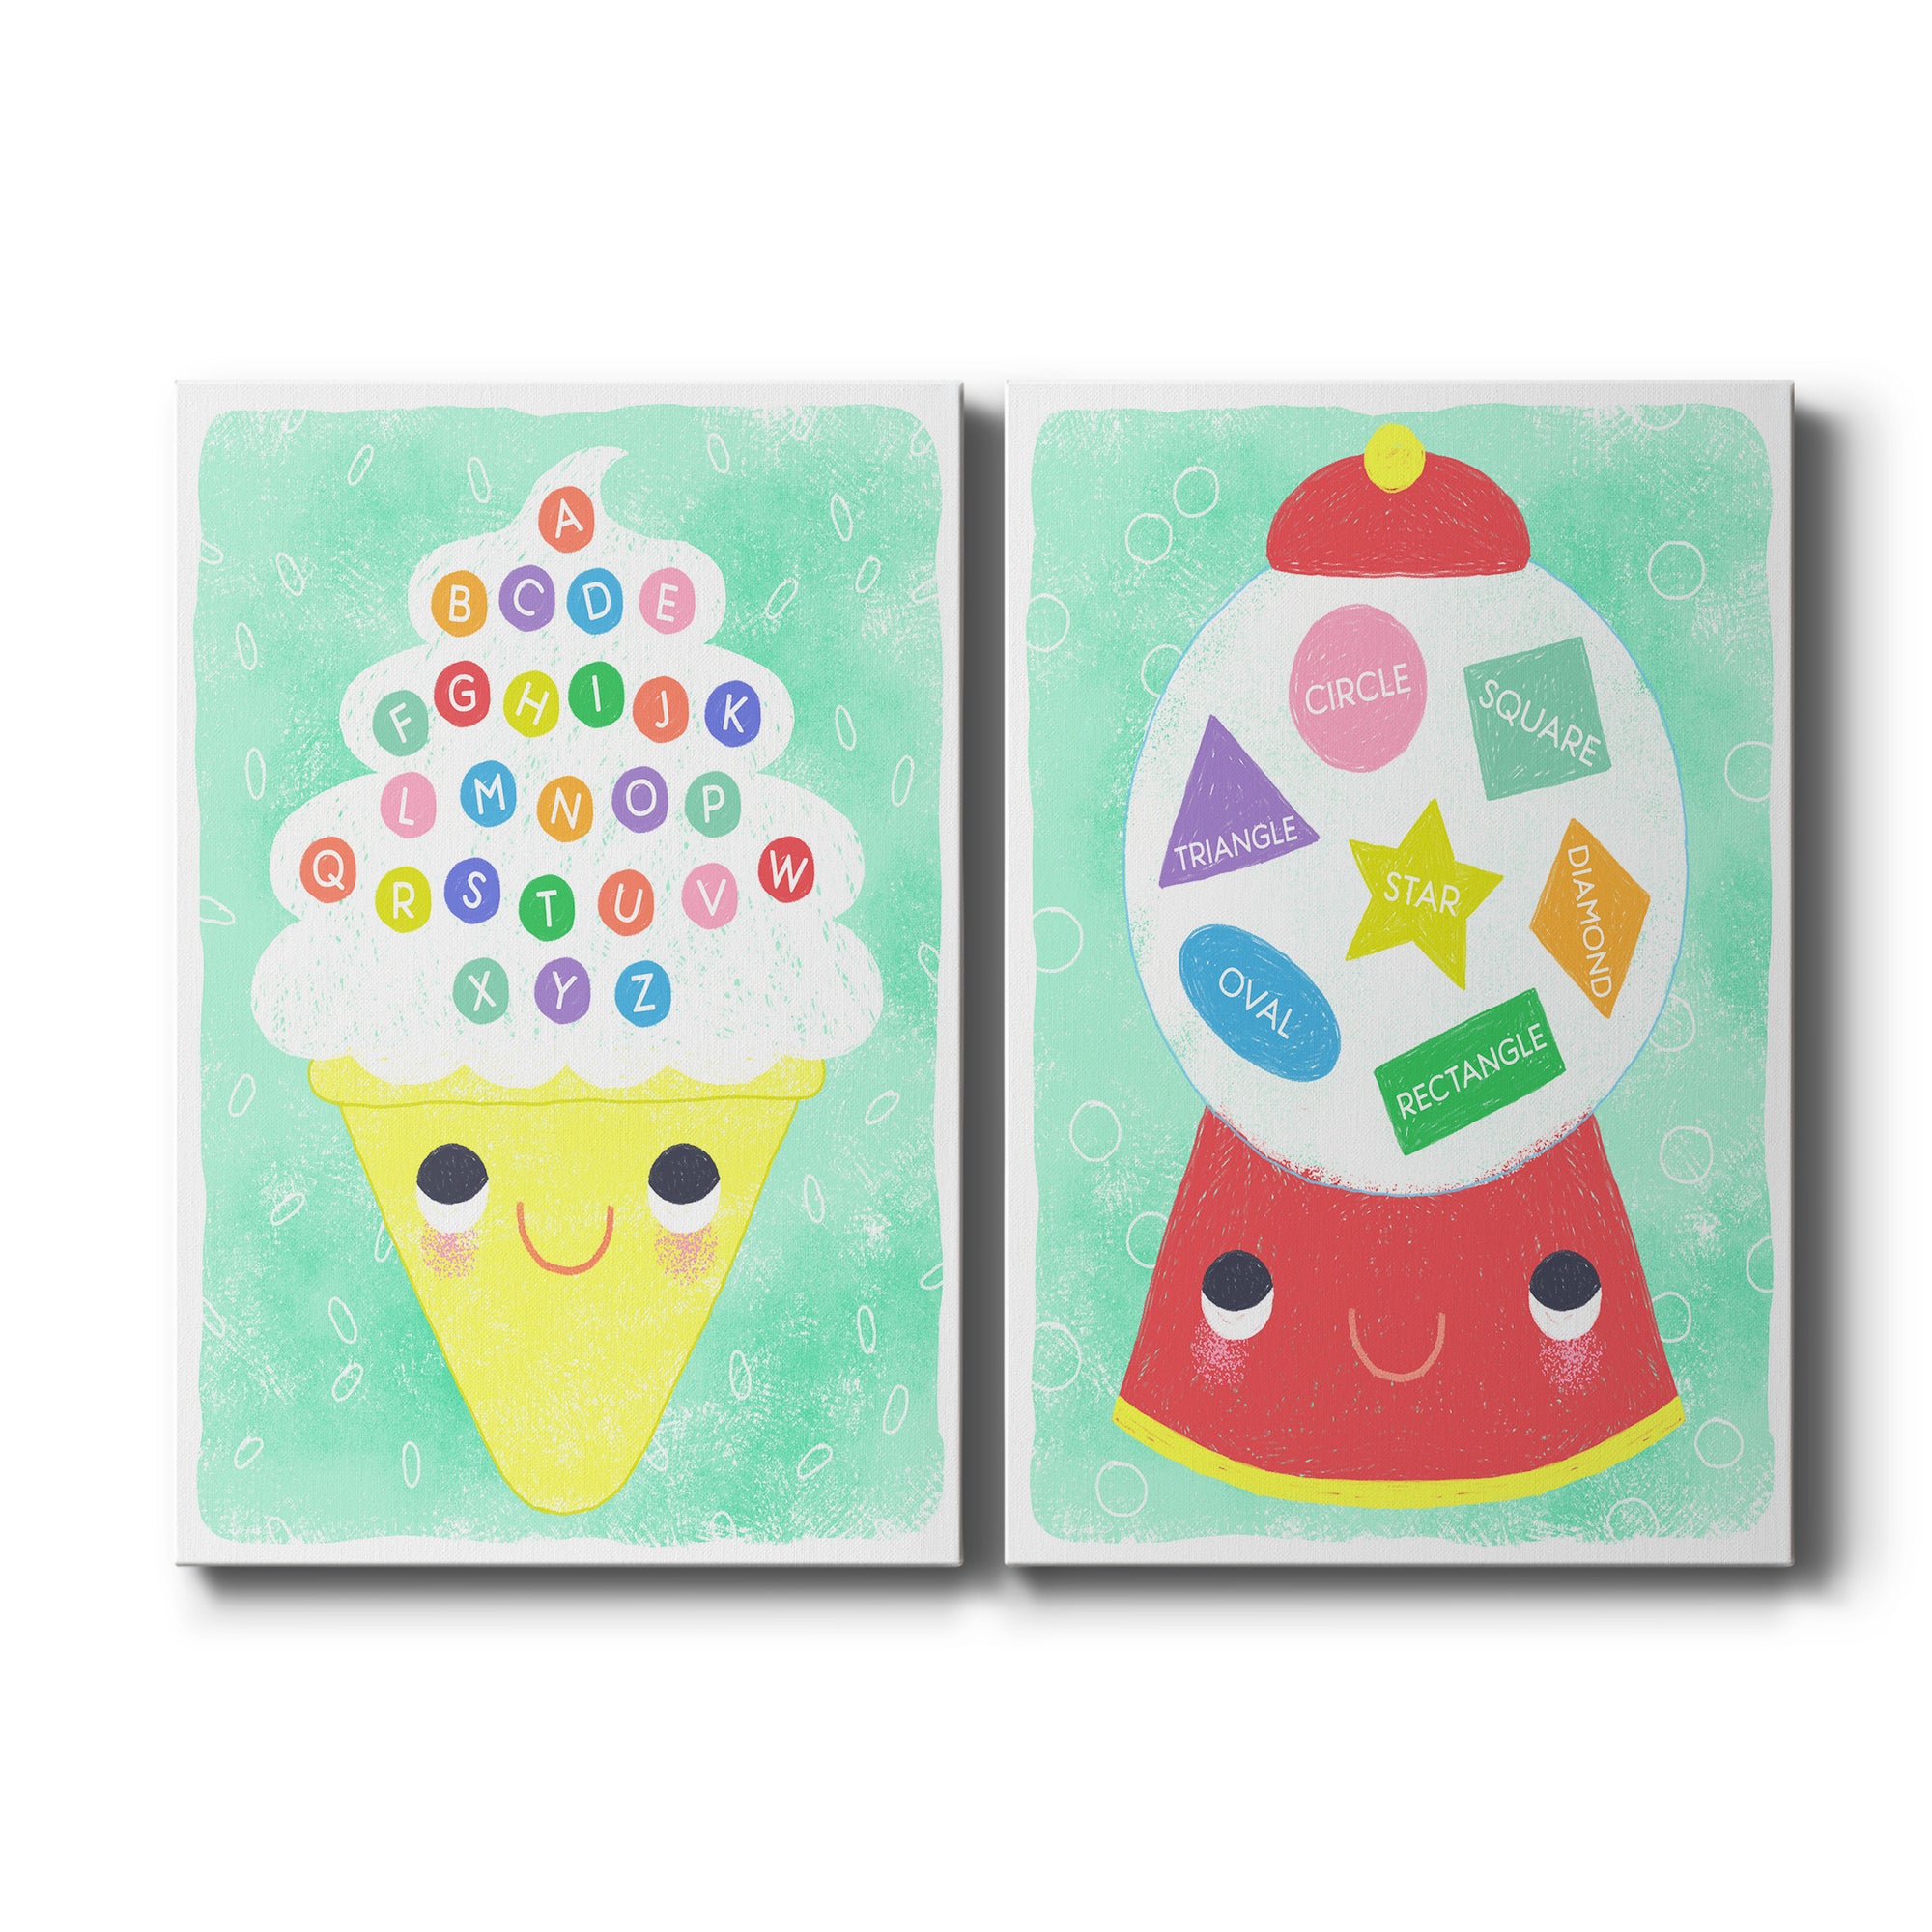 Ice Cream Alphabet Premium Gallery Wrapped Canvas - Ready to Hang - Set of 2 - 8 x 12 Each